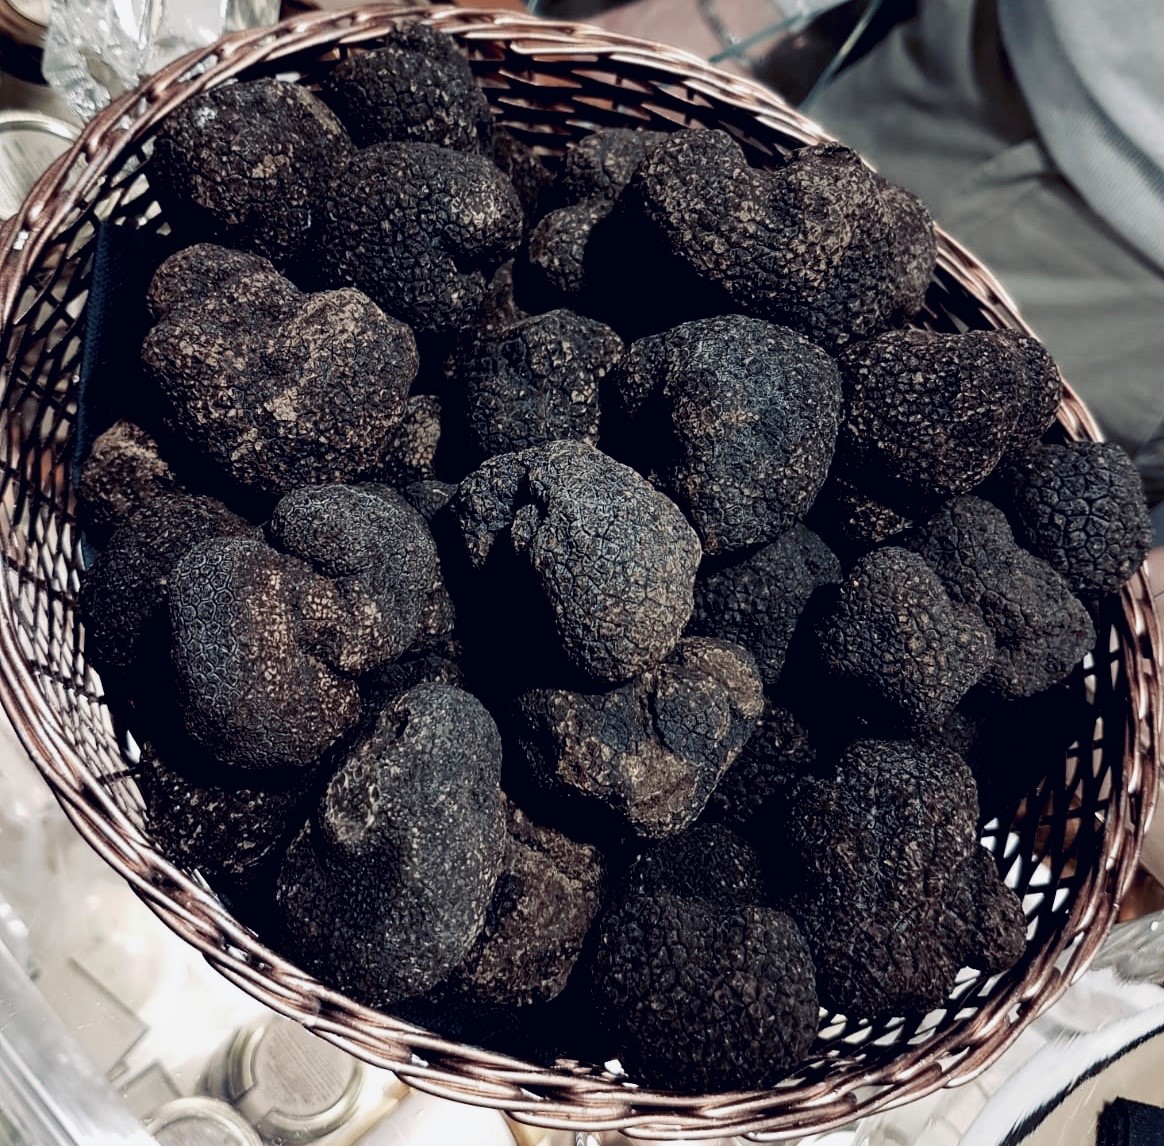 The French black truffles, or "black diamond", is considered one of the expensive organic foods